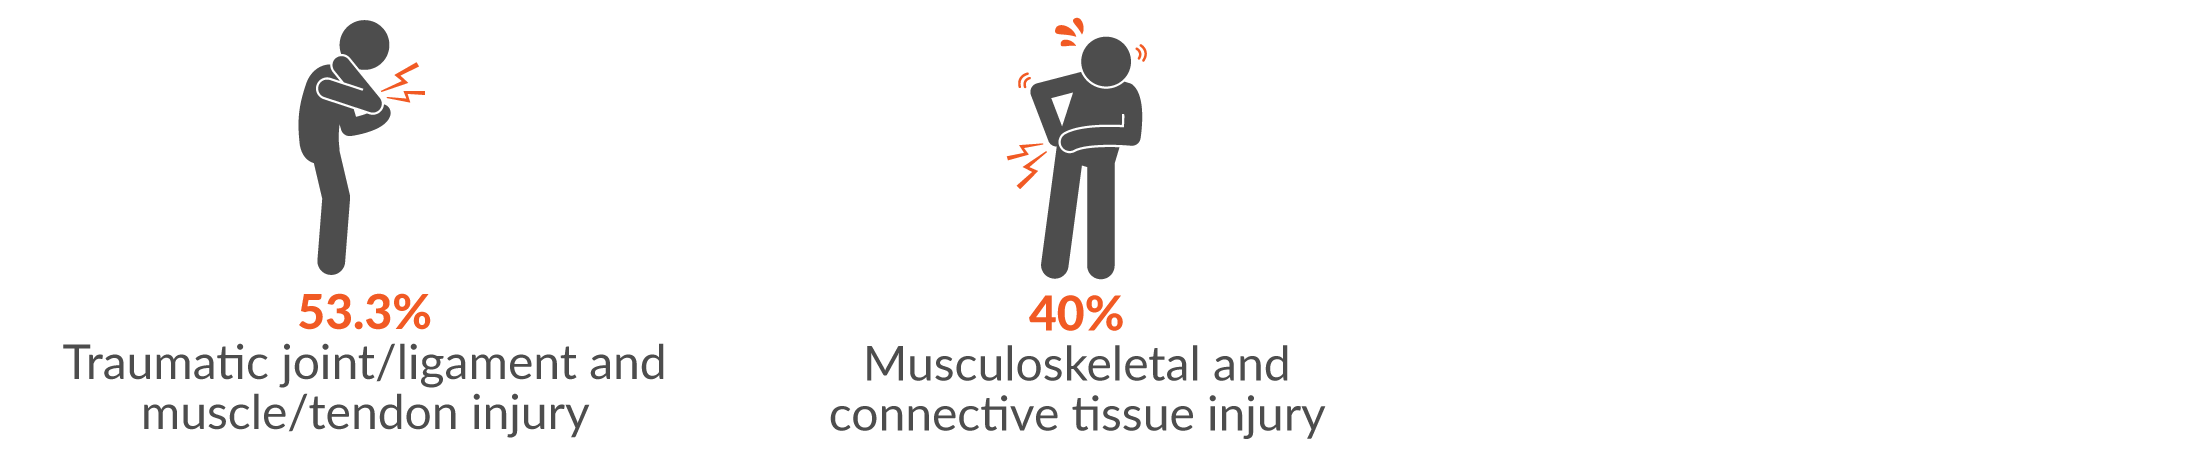 This infographic shows the main two injury groups resulting from body stressing were 53.3% traumatic joint/ligament and muscle/tendon injury and 40% musculoskeletal and connective tissue injury.